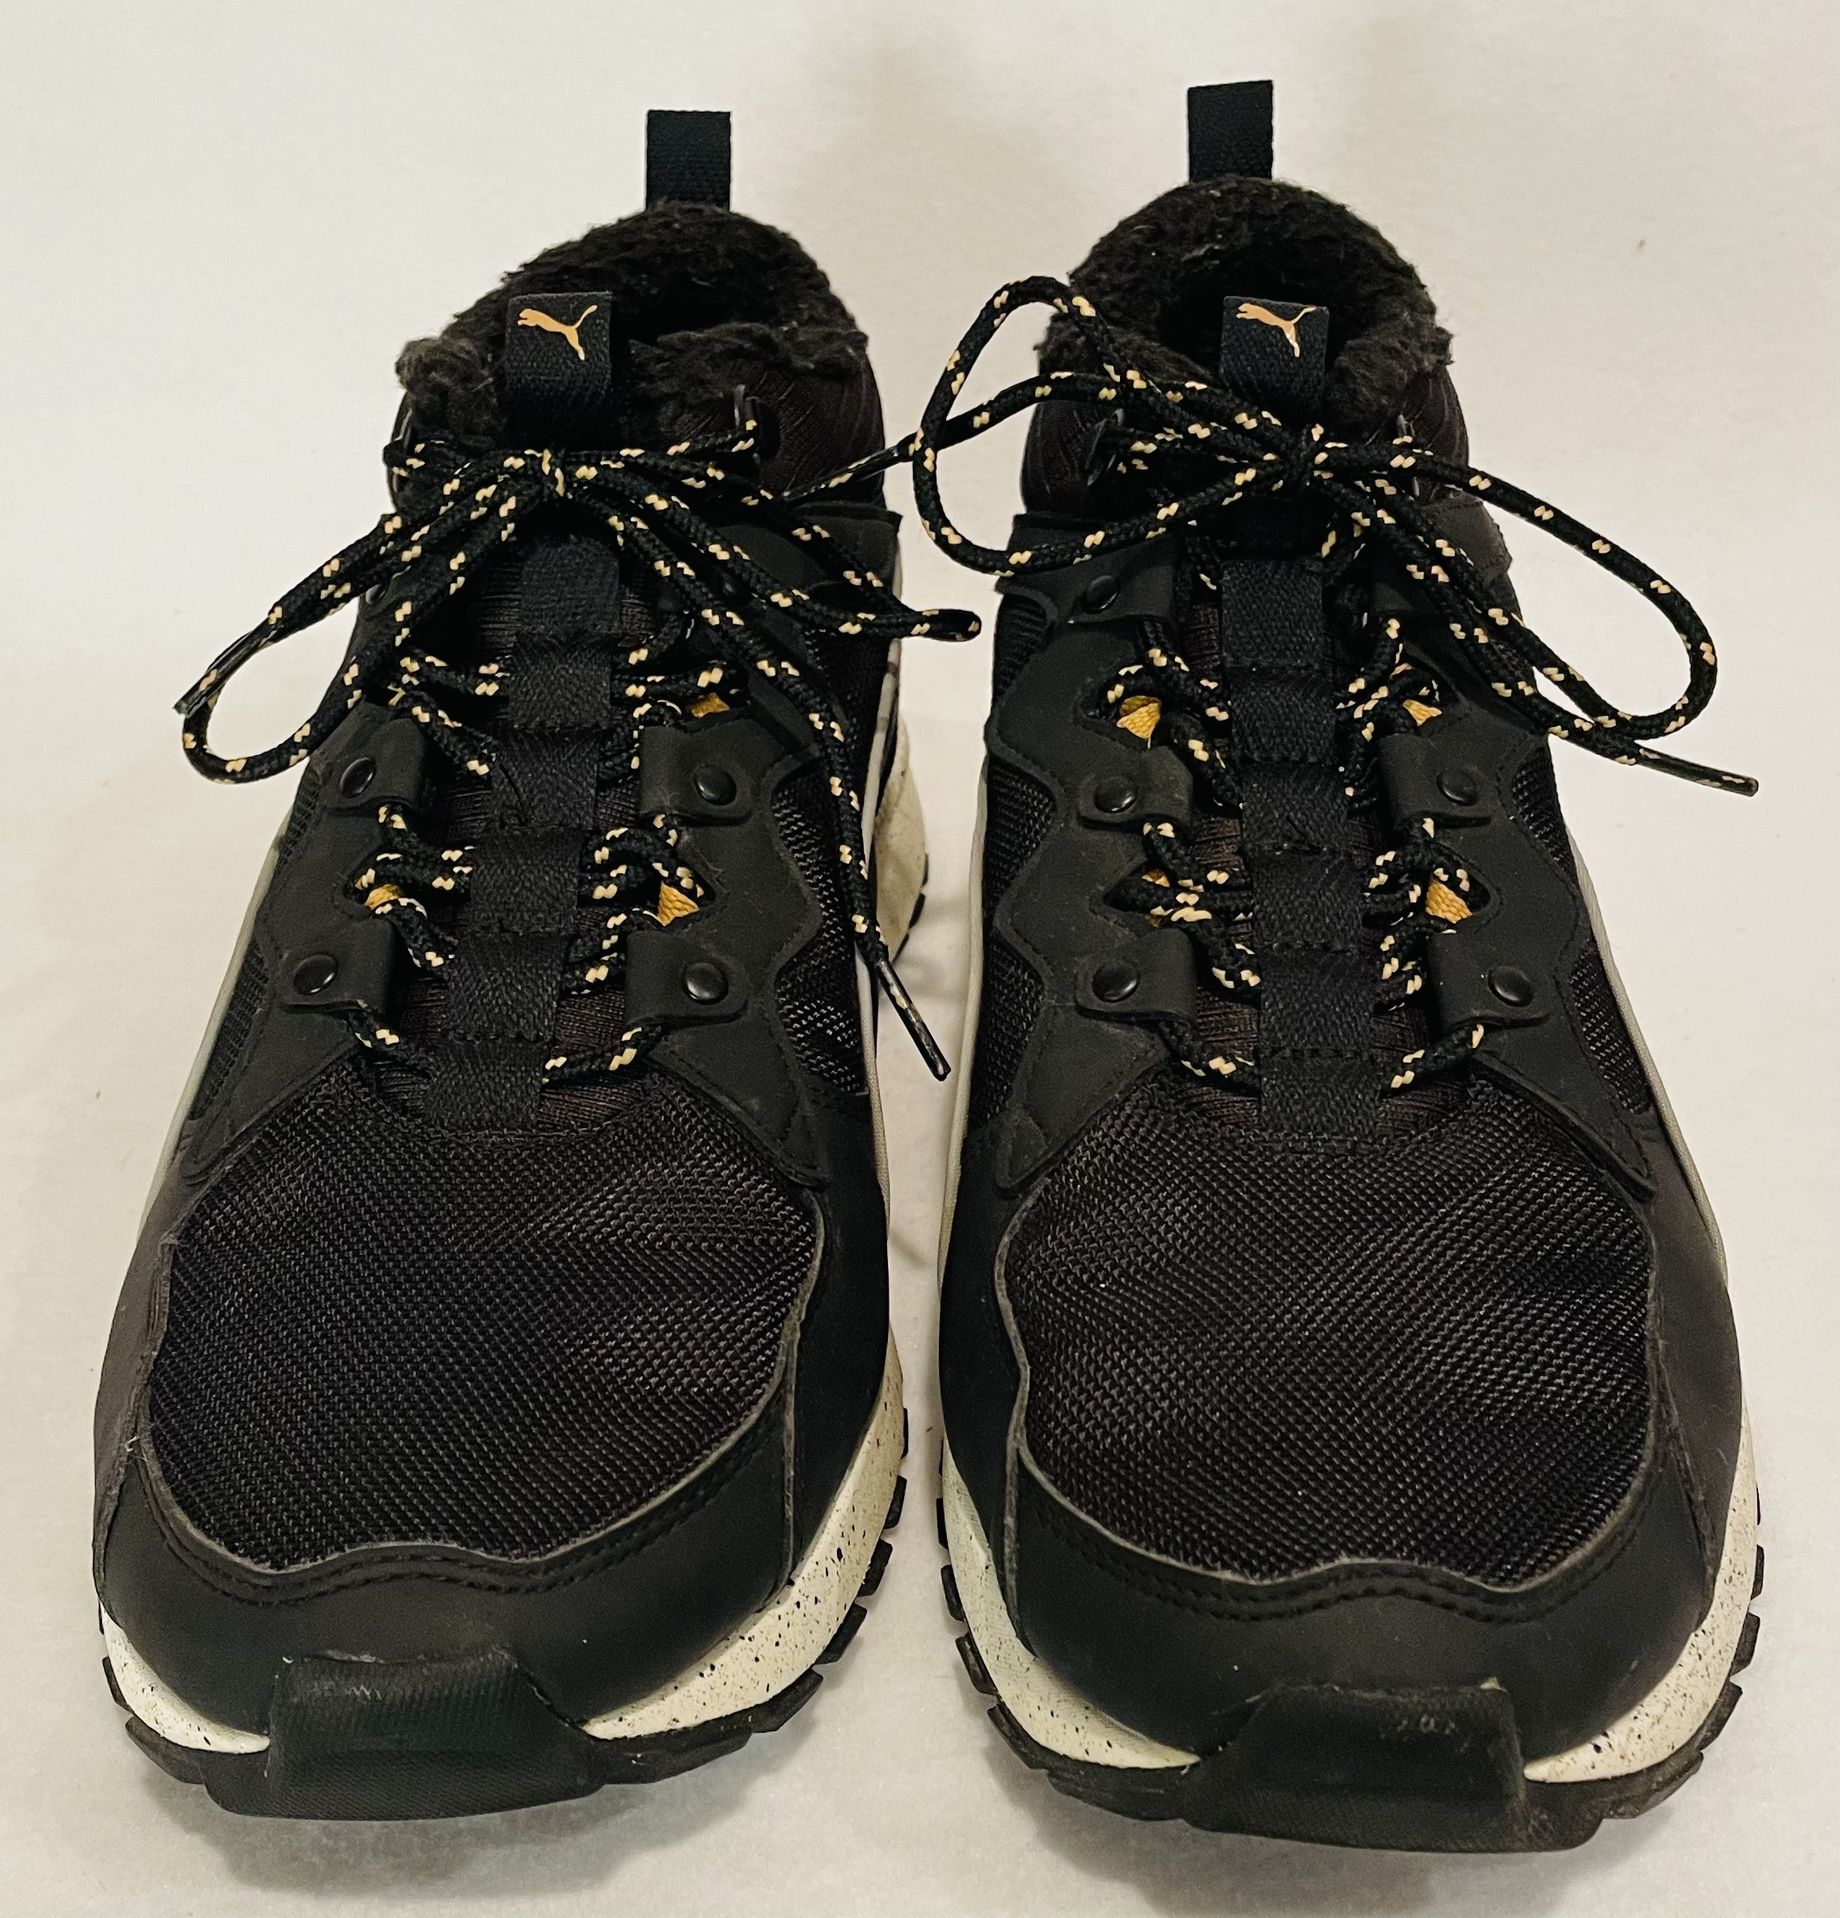 PUMA PACER NEXT SB WATER REPELLENT WTR BOOTS MENS BLACK & WHITE SZ for Sale in Bolingbrook, IL - OfferUp